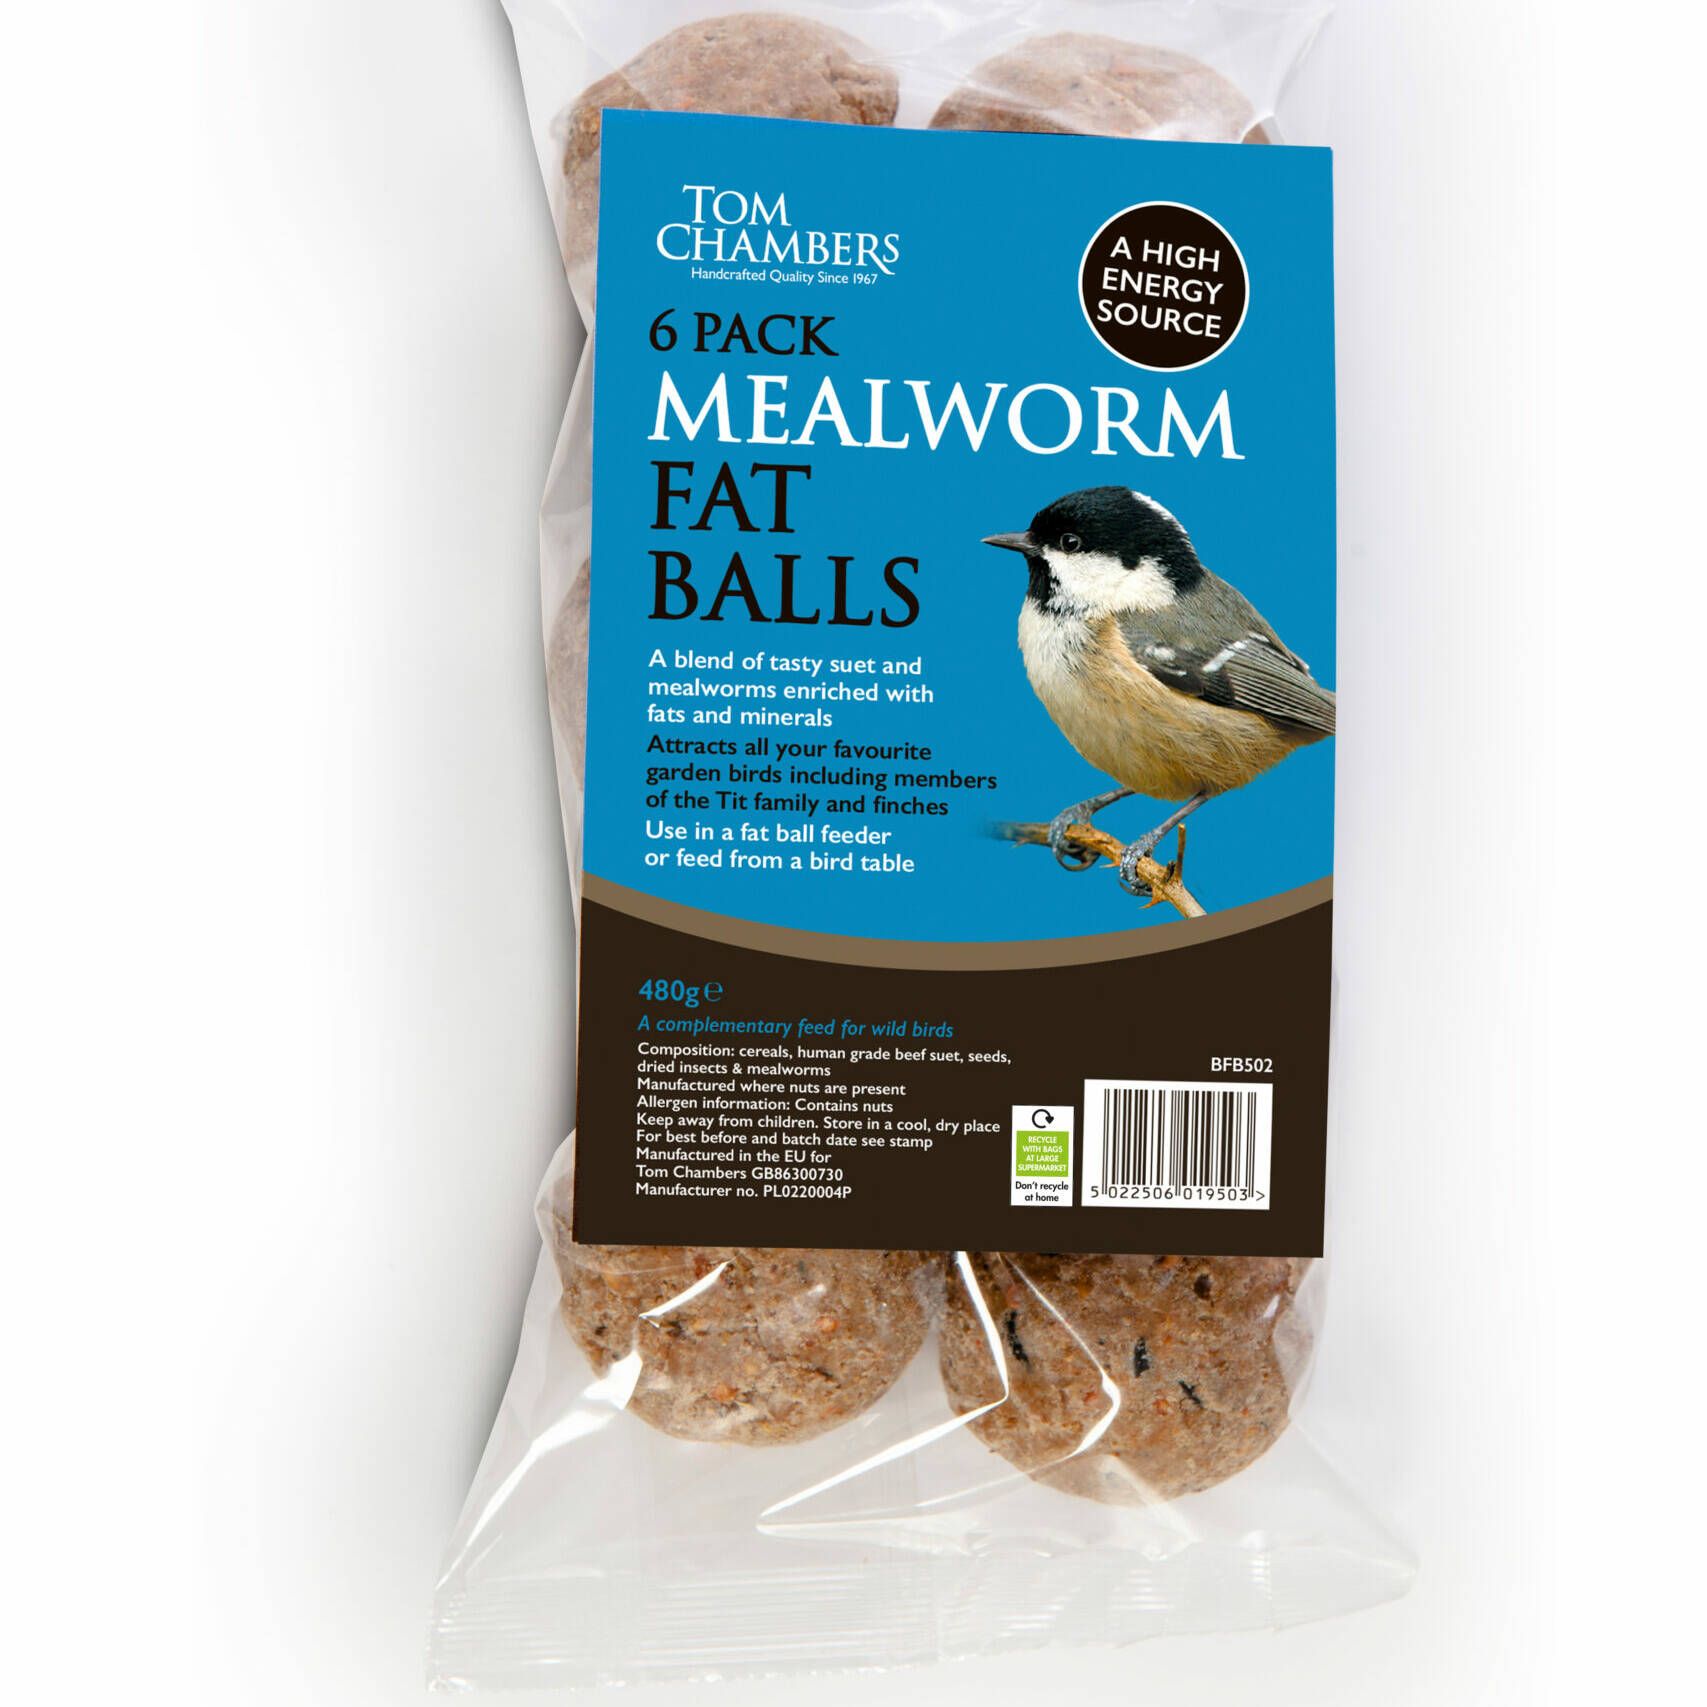 Tom chambers Fat Balls - 6 pack - Mealworm - No Nets